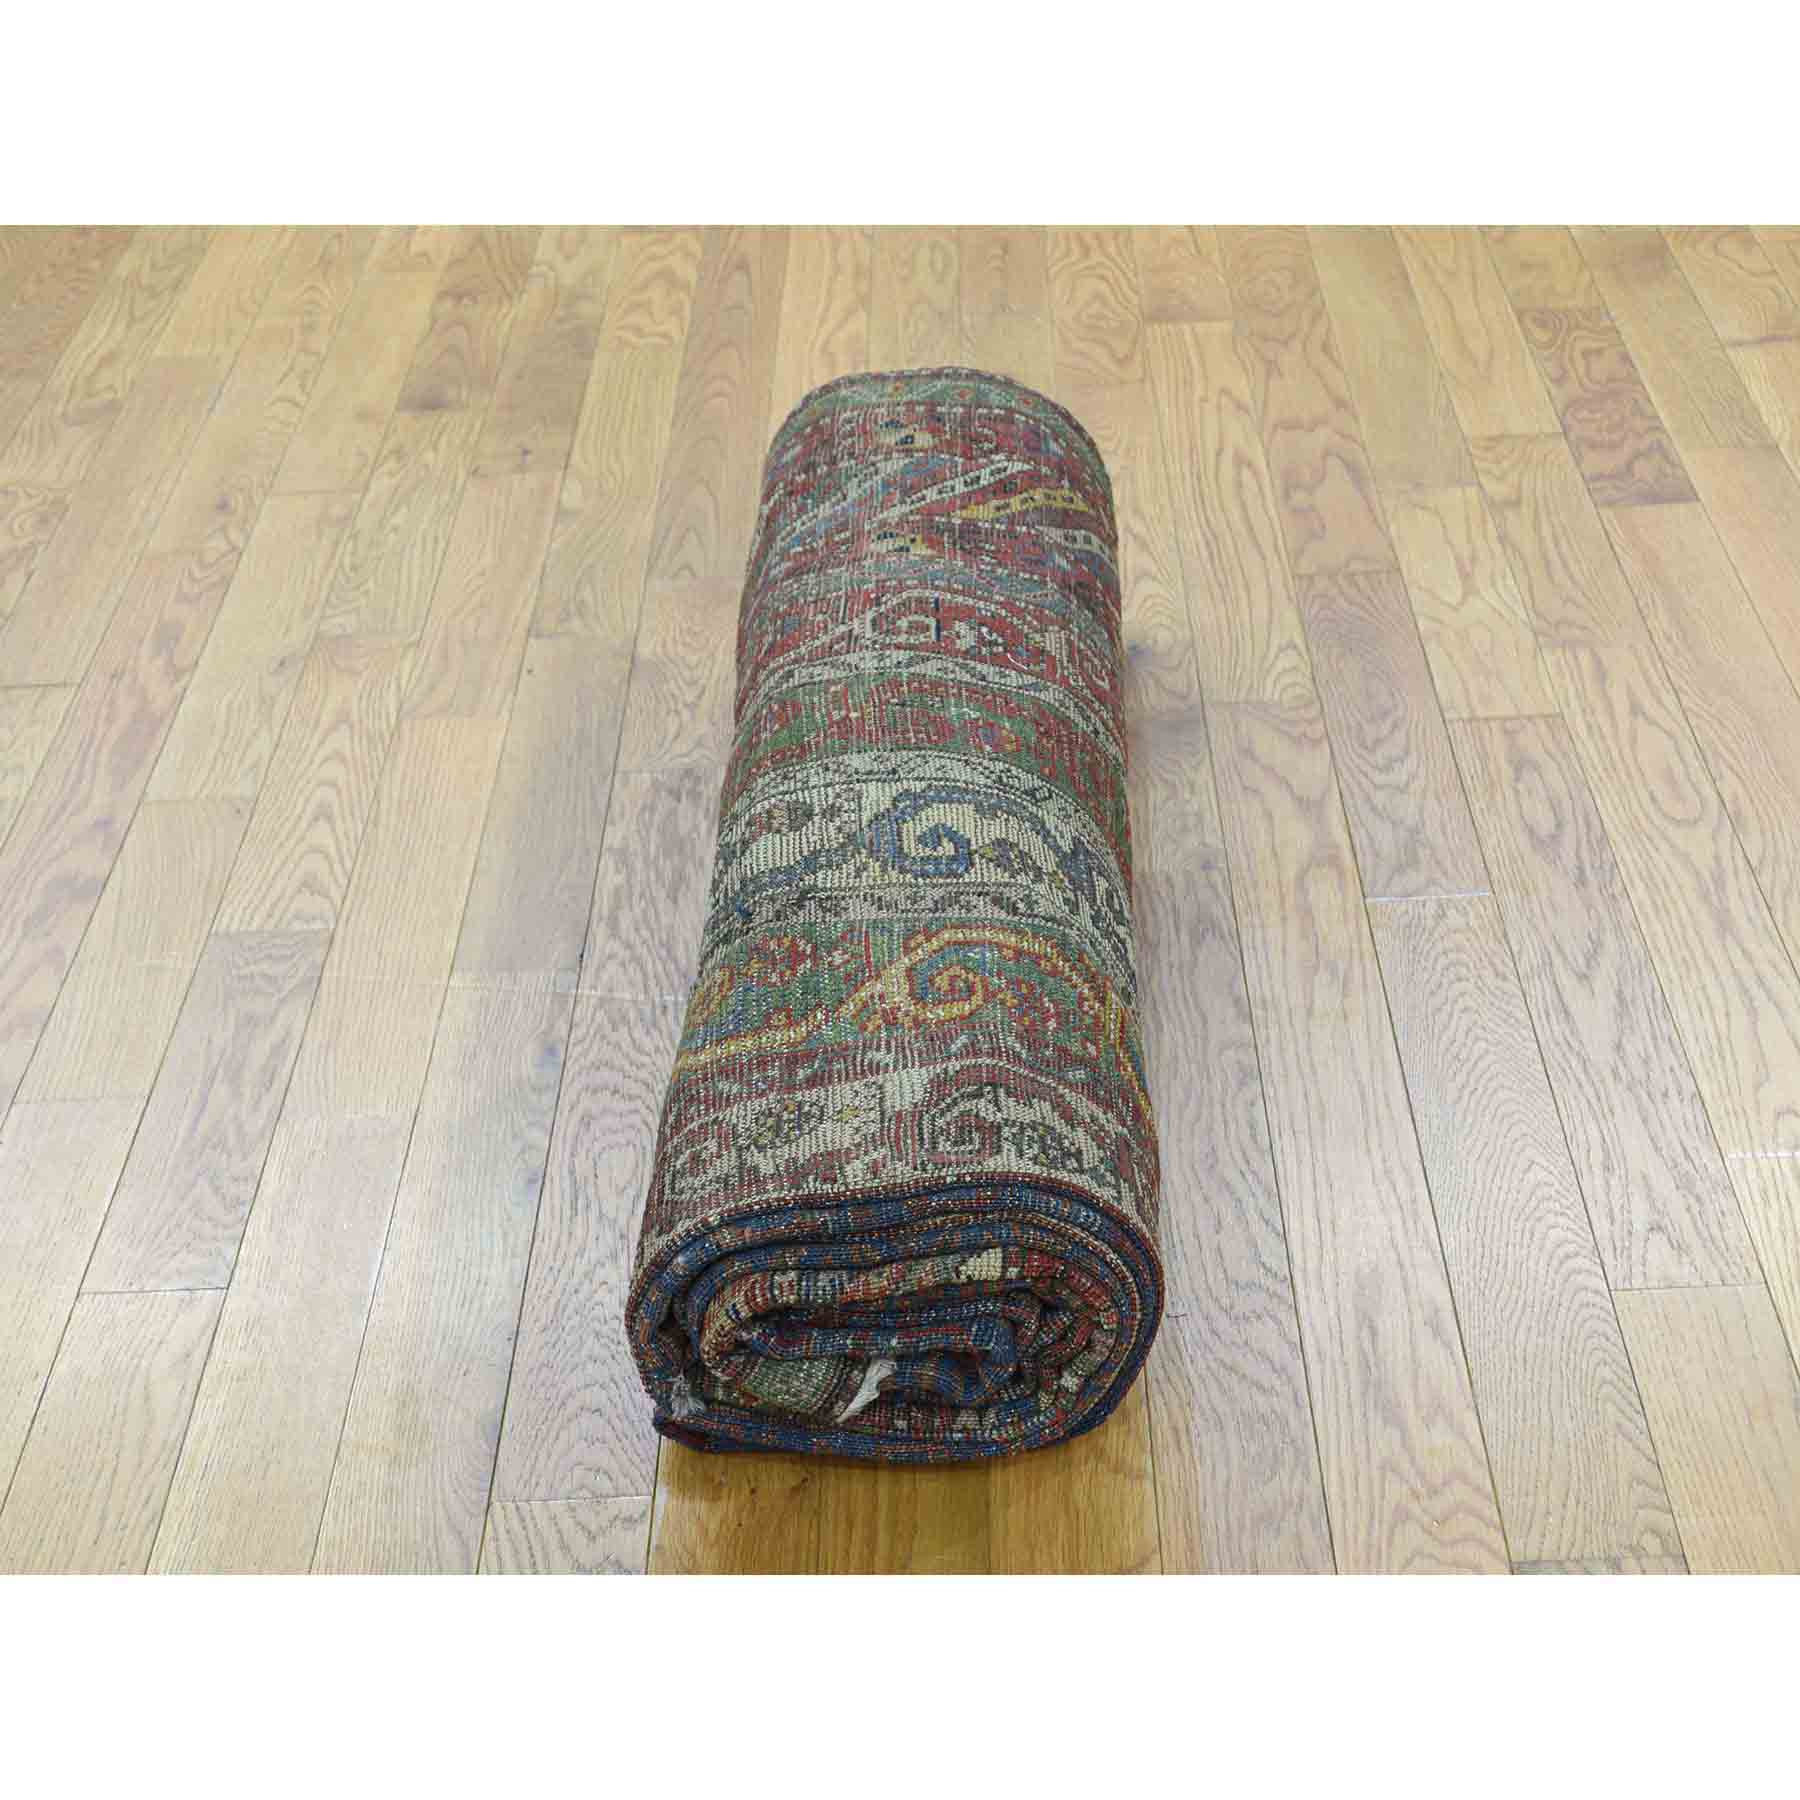 Antique-Hand-Knotted-Rug-172105